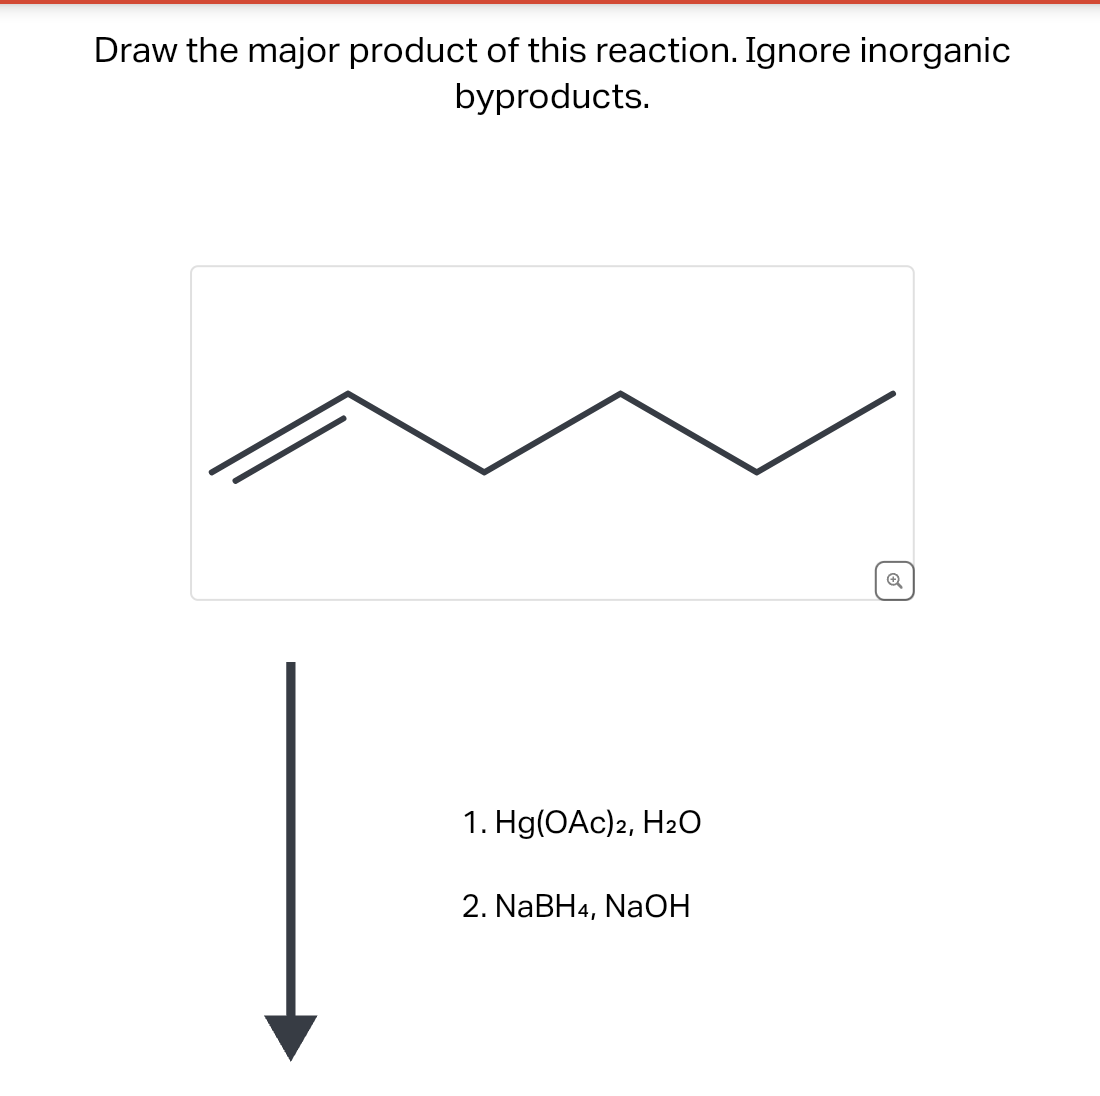 Draw the major product of this reaction. Ignore inorganic
byproducts.
1. Hg(OAc) 2, H₂O
2. NaBH4, NaOH
Q